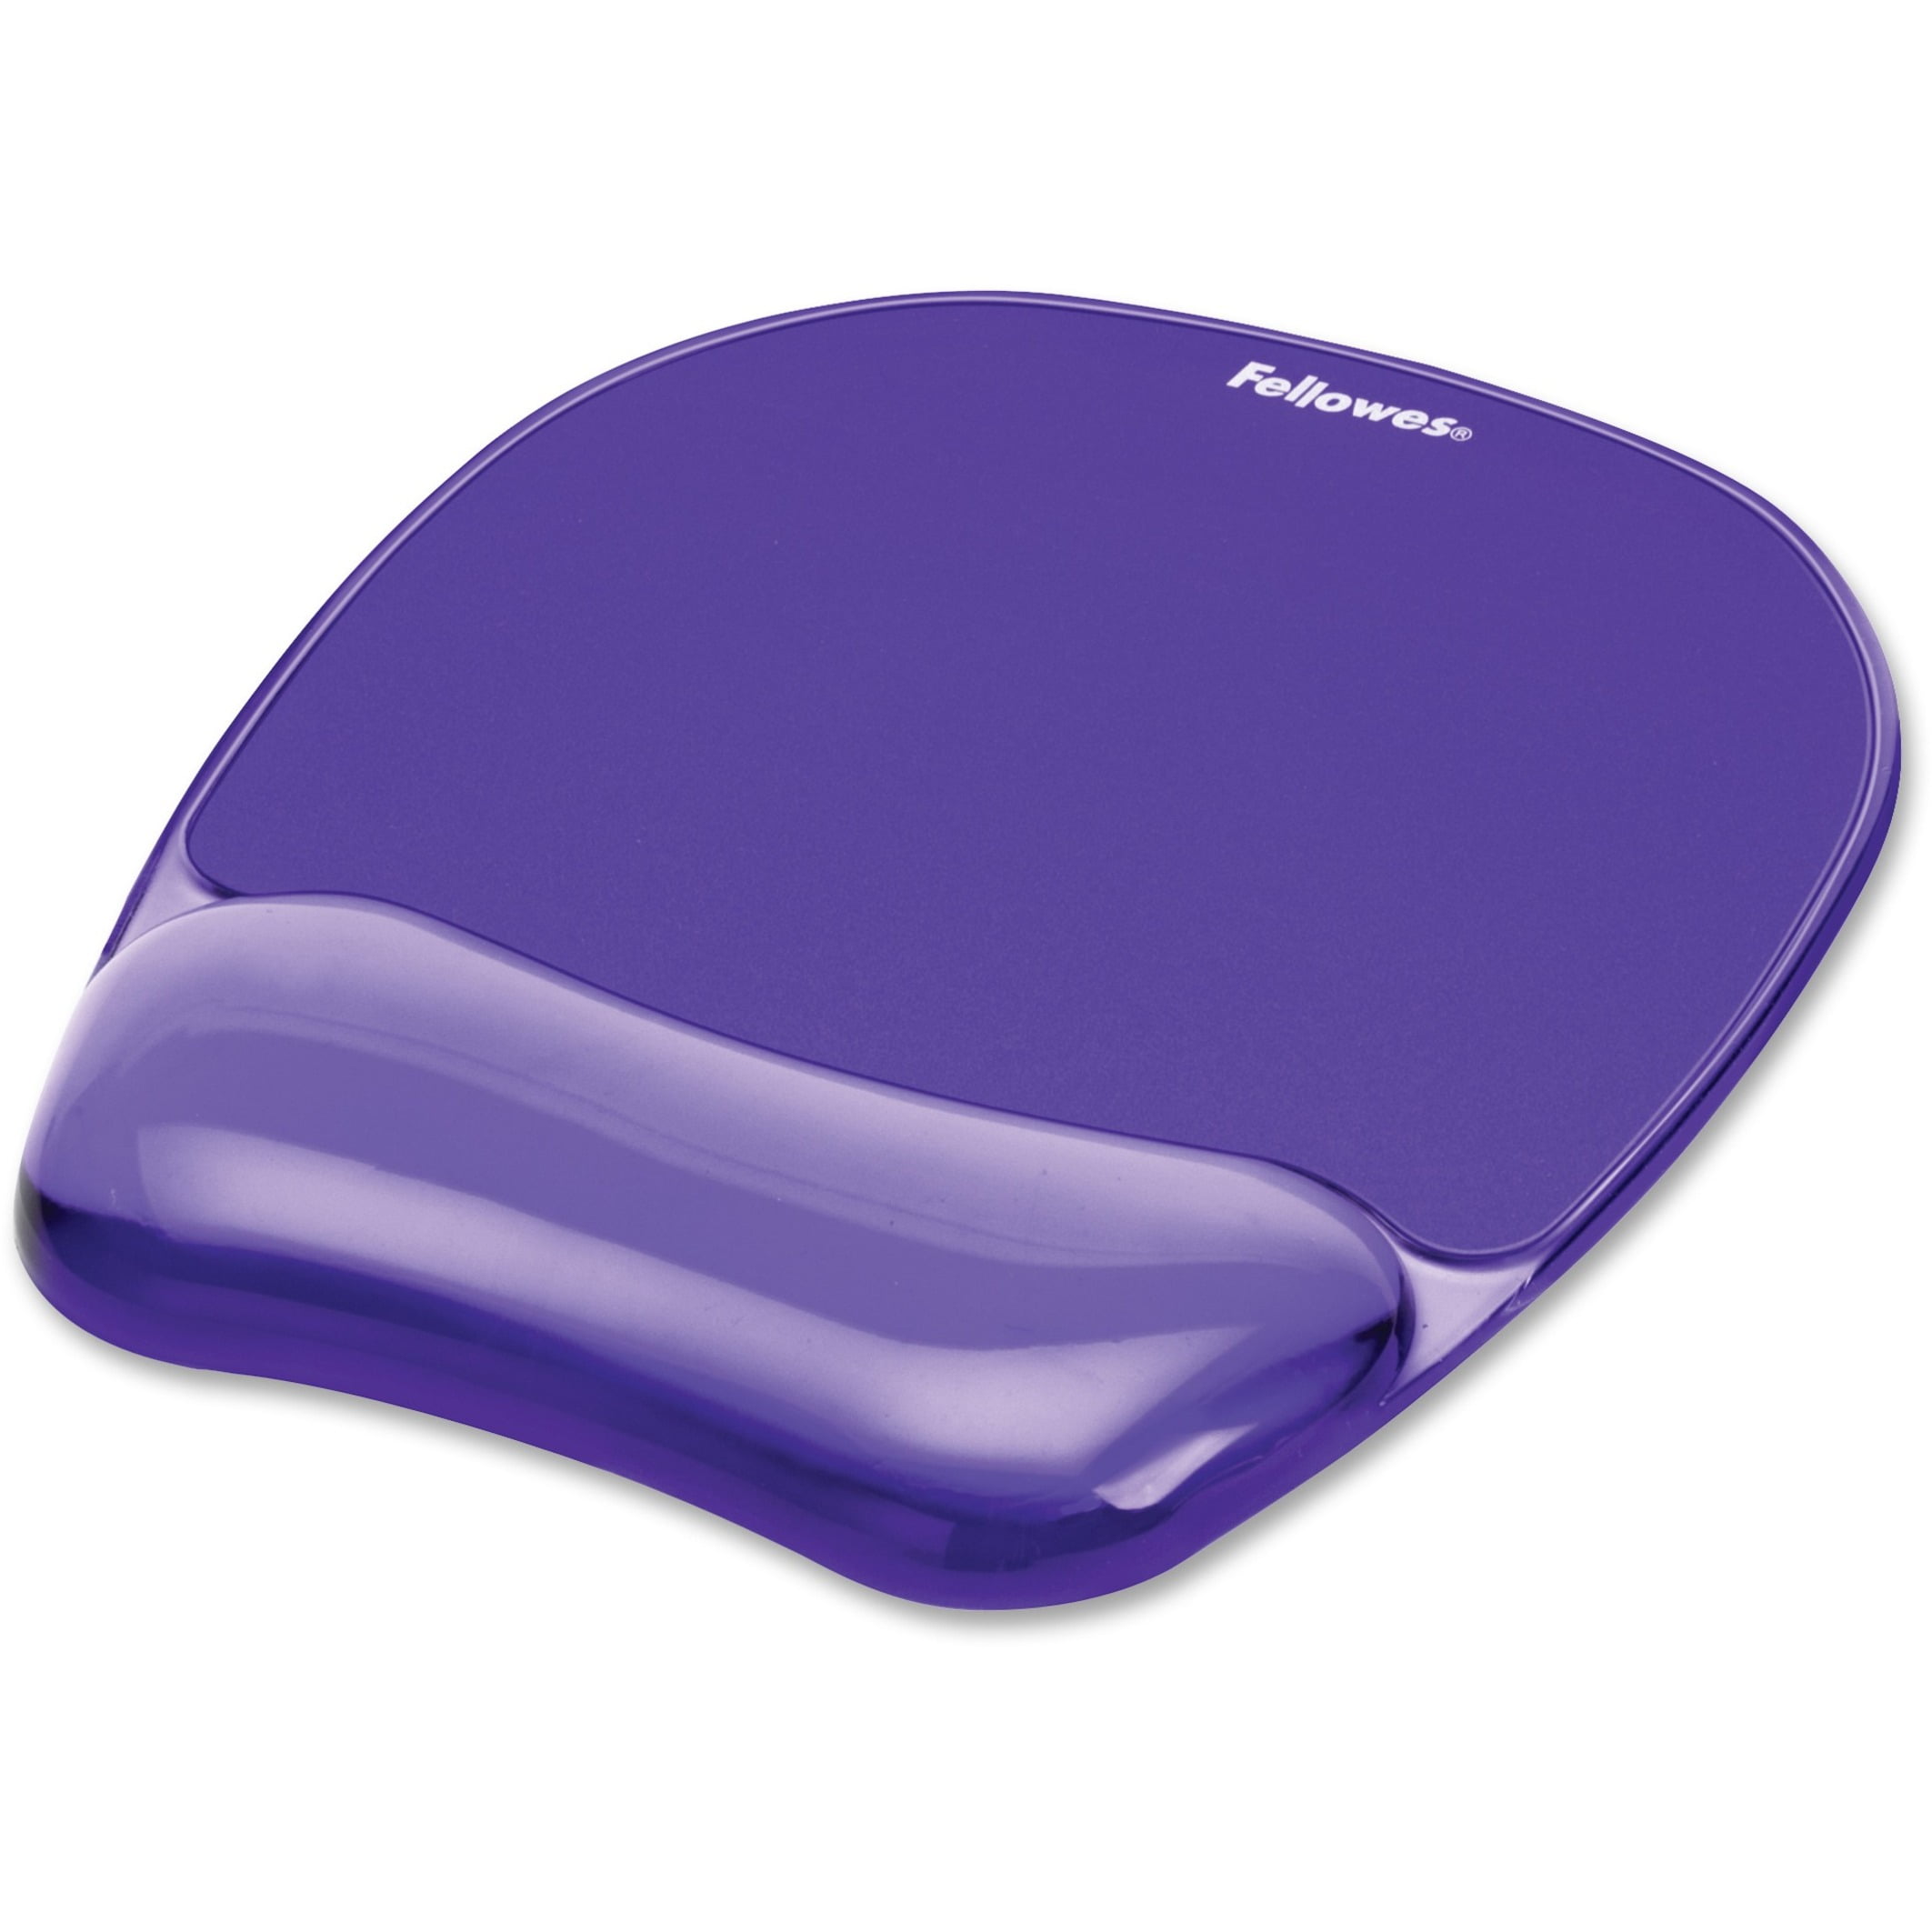 Fellowes 9175101 Mircoban Mouse Pad with Wrist Support 